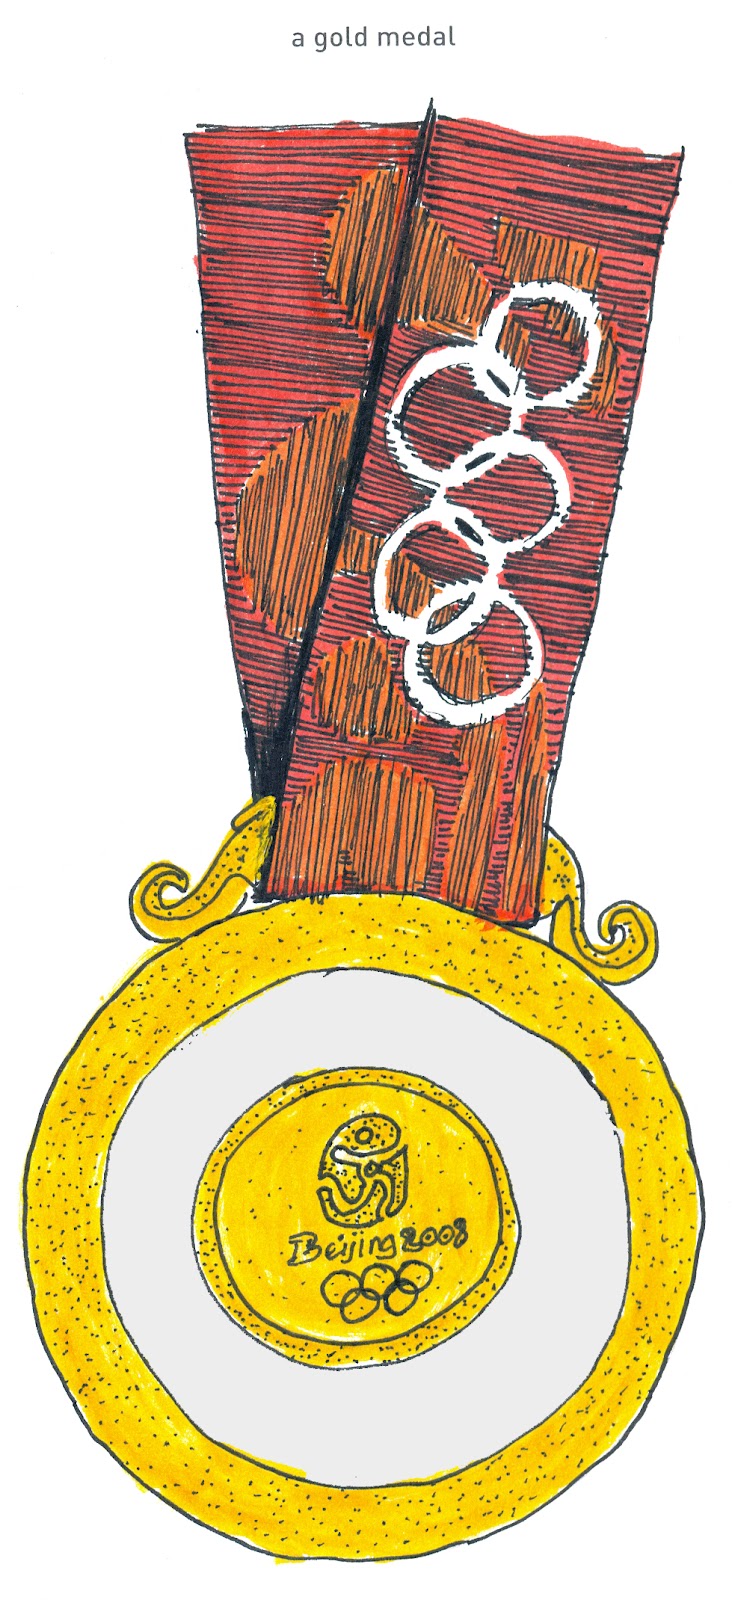 Ana's Strictly Sketchbook: 642 Things to Draw #41 - A Gold ...